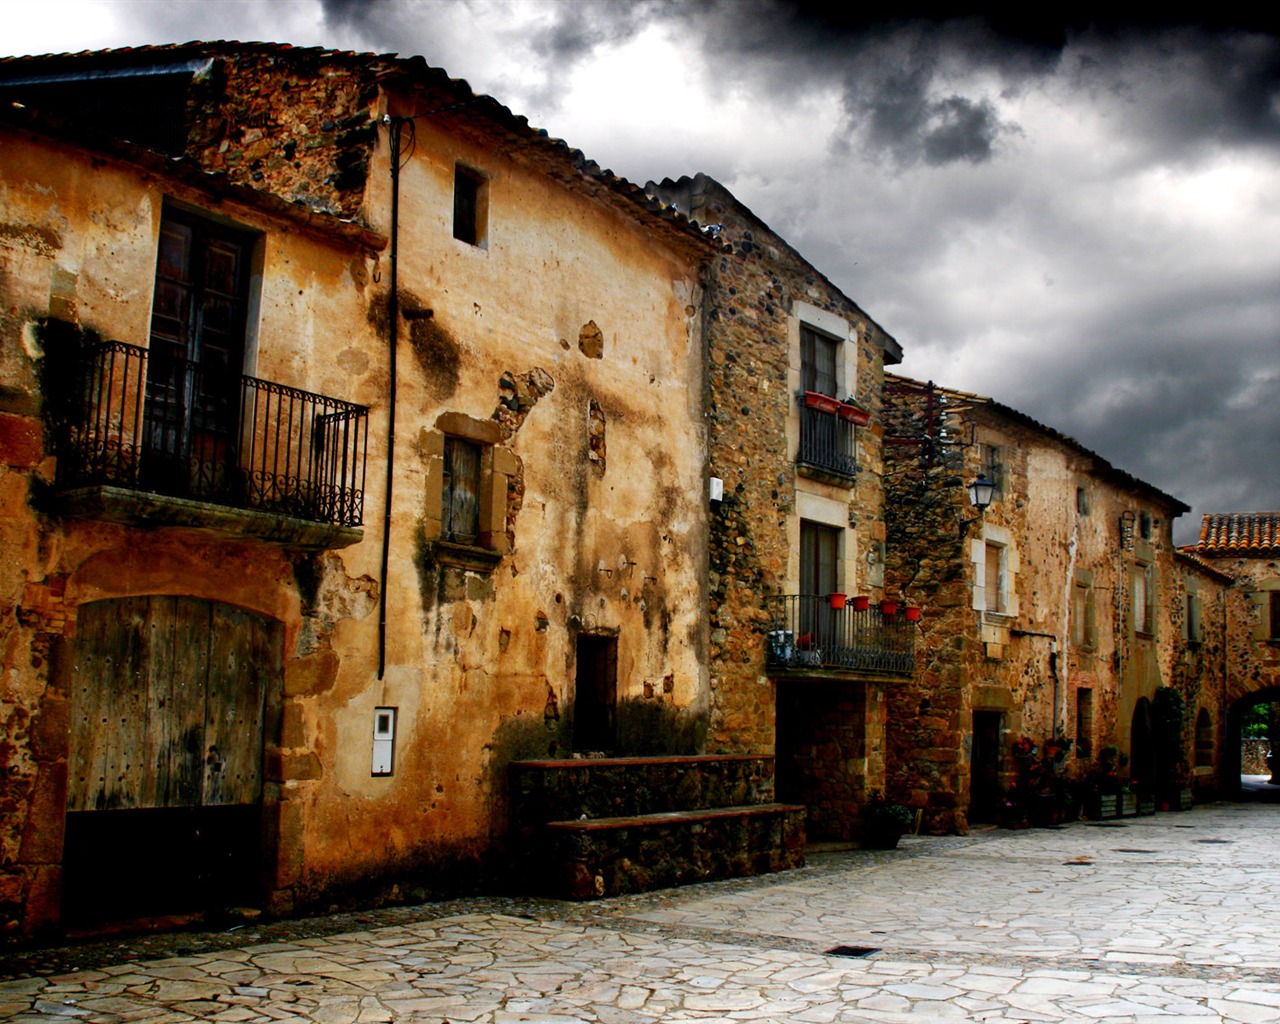 Spain Girona HDR-style wallpapers #11 - 1280x1024